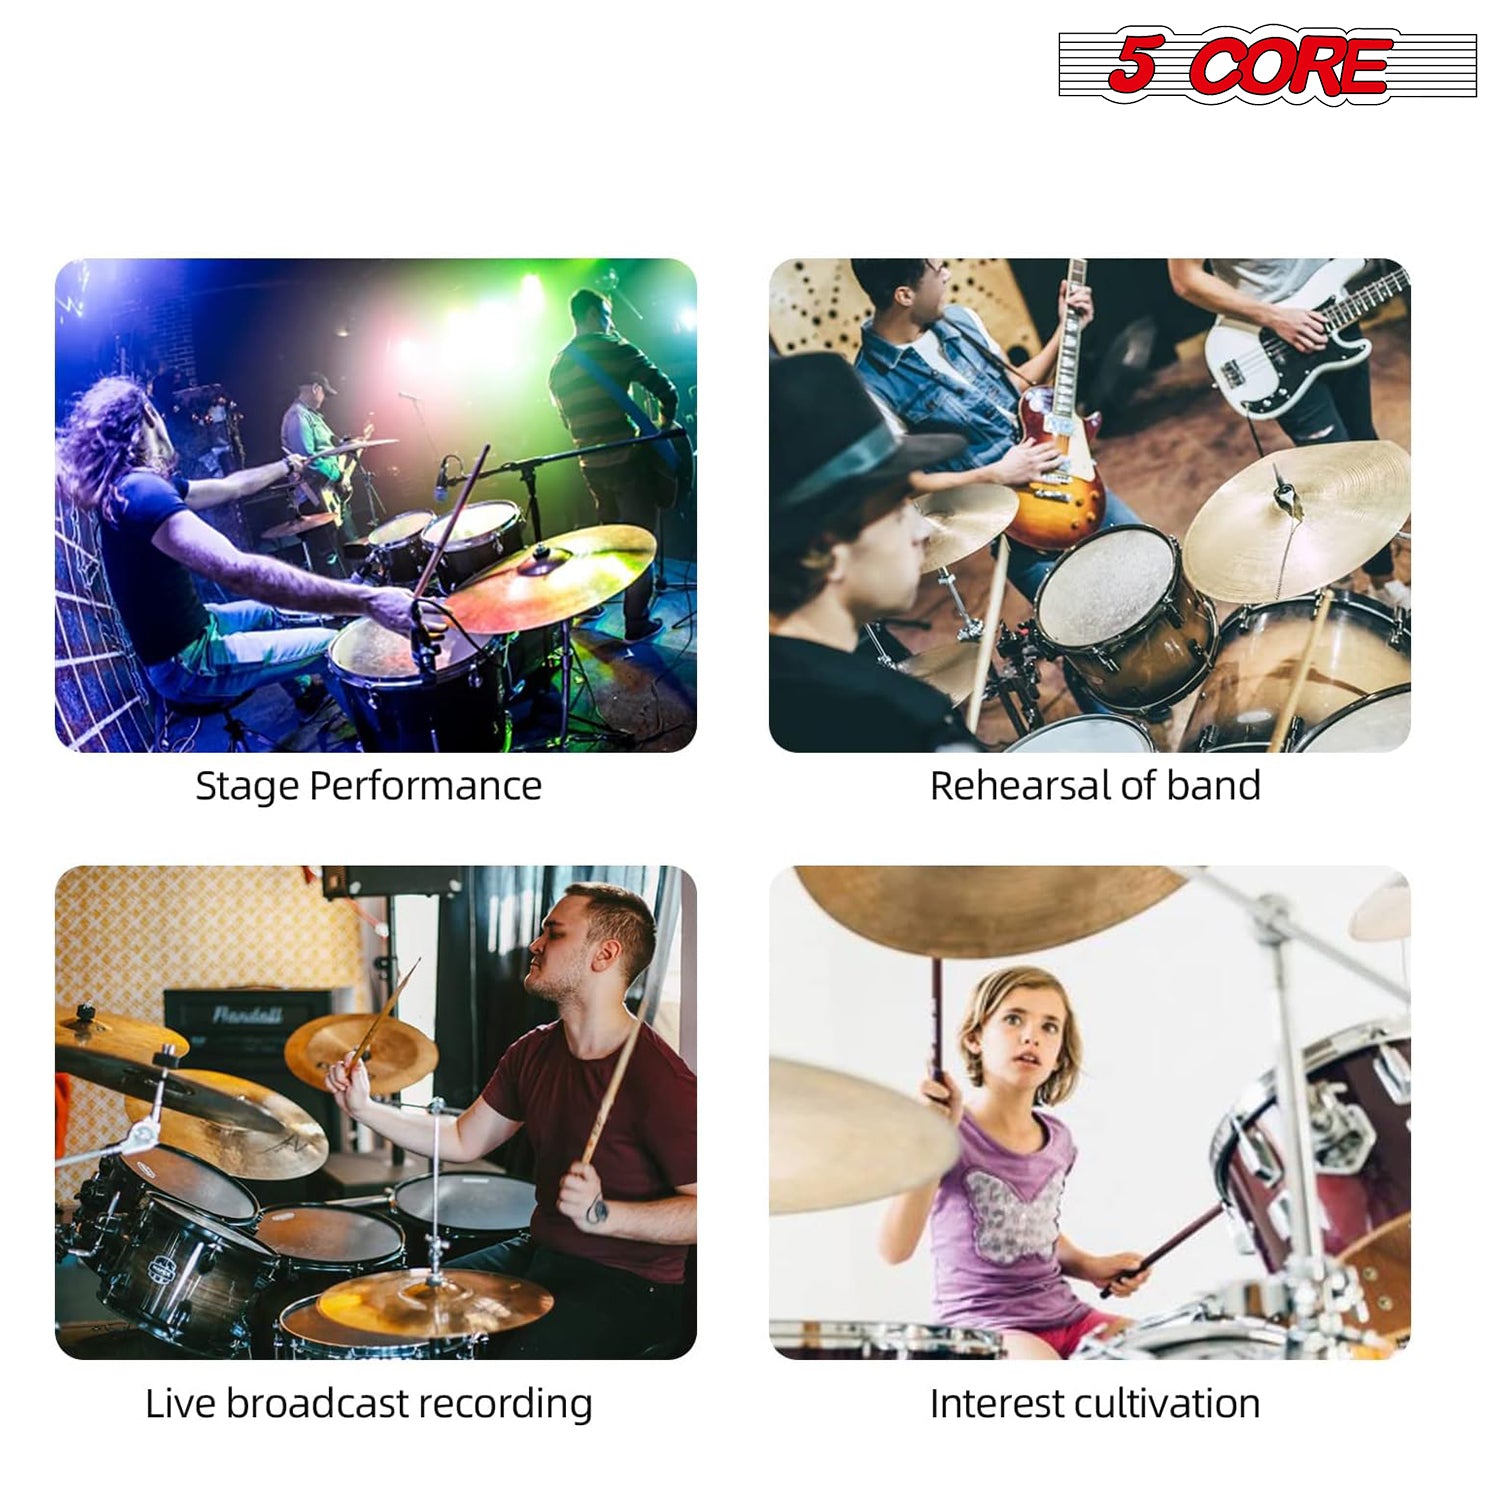 5 Core Drum Microphone Kit 9 Piece Wired Full Metal Dynamic Wired drums Mic Set for Drummers w/ Kick Bass Tom Snare + Silver Carrying Case Sponge & Thread Holder for Vocal & Other Instrument - DM 9RND RED